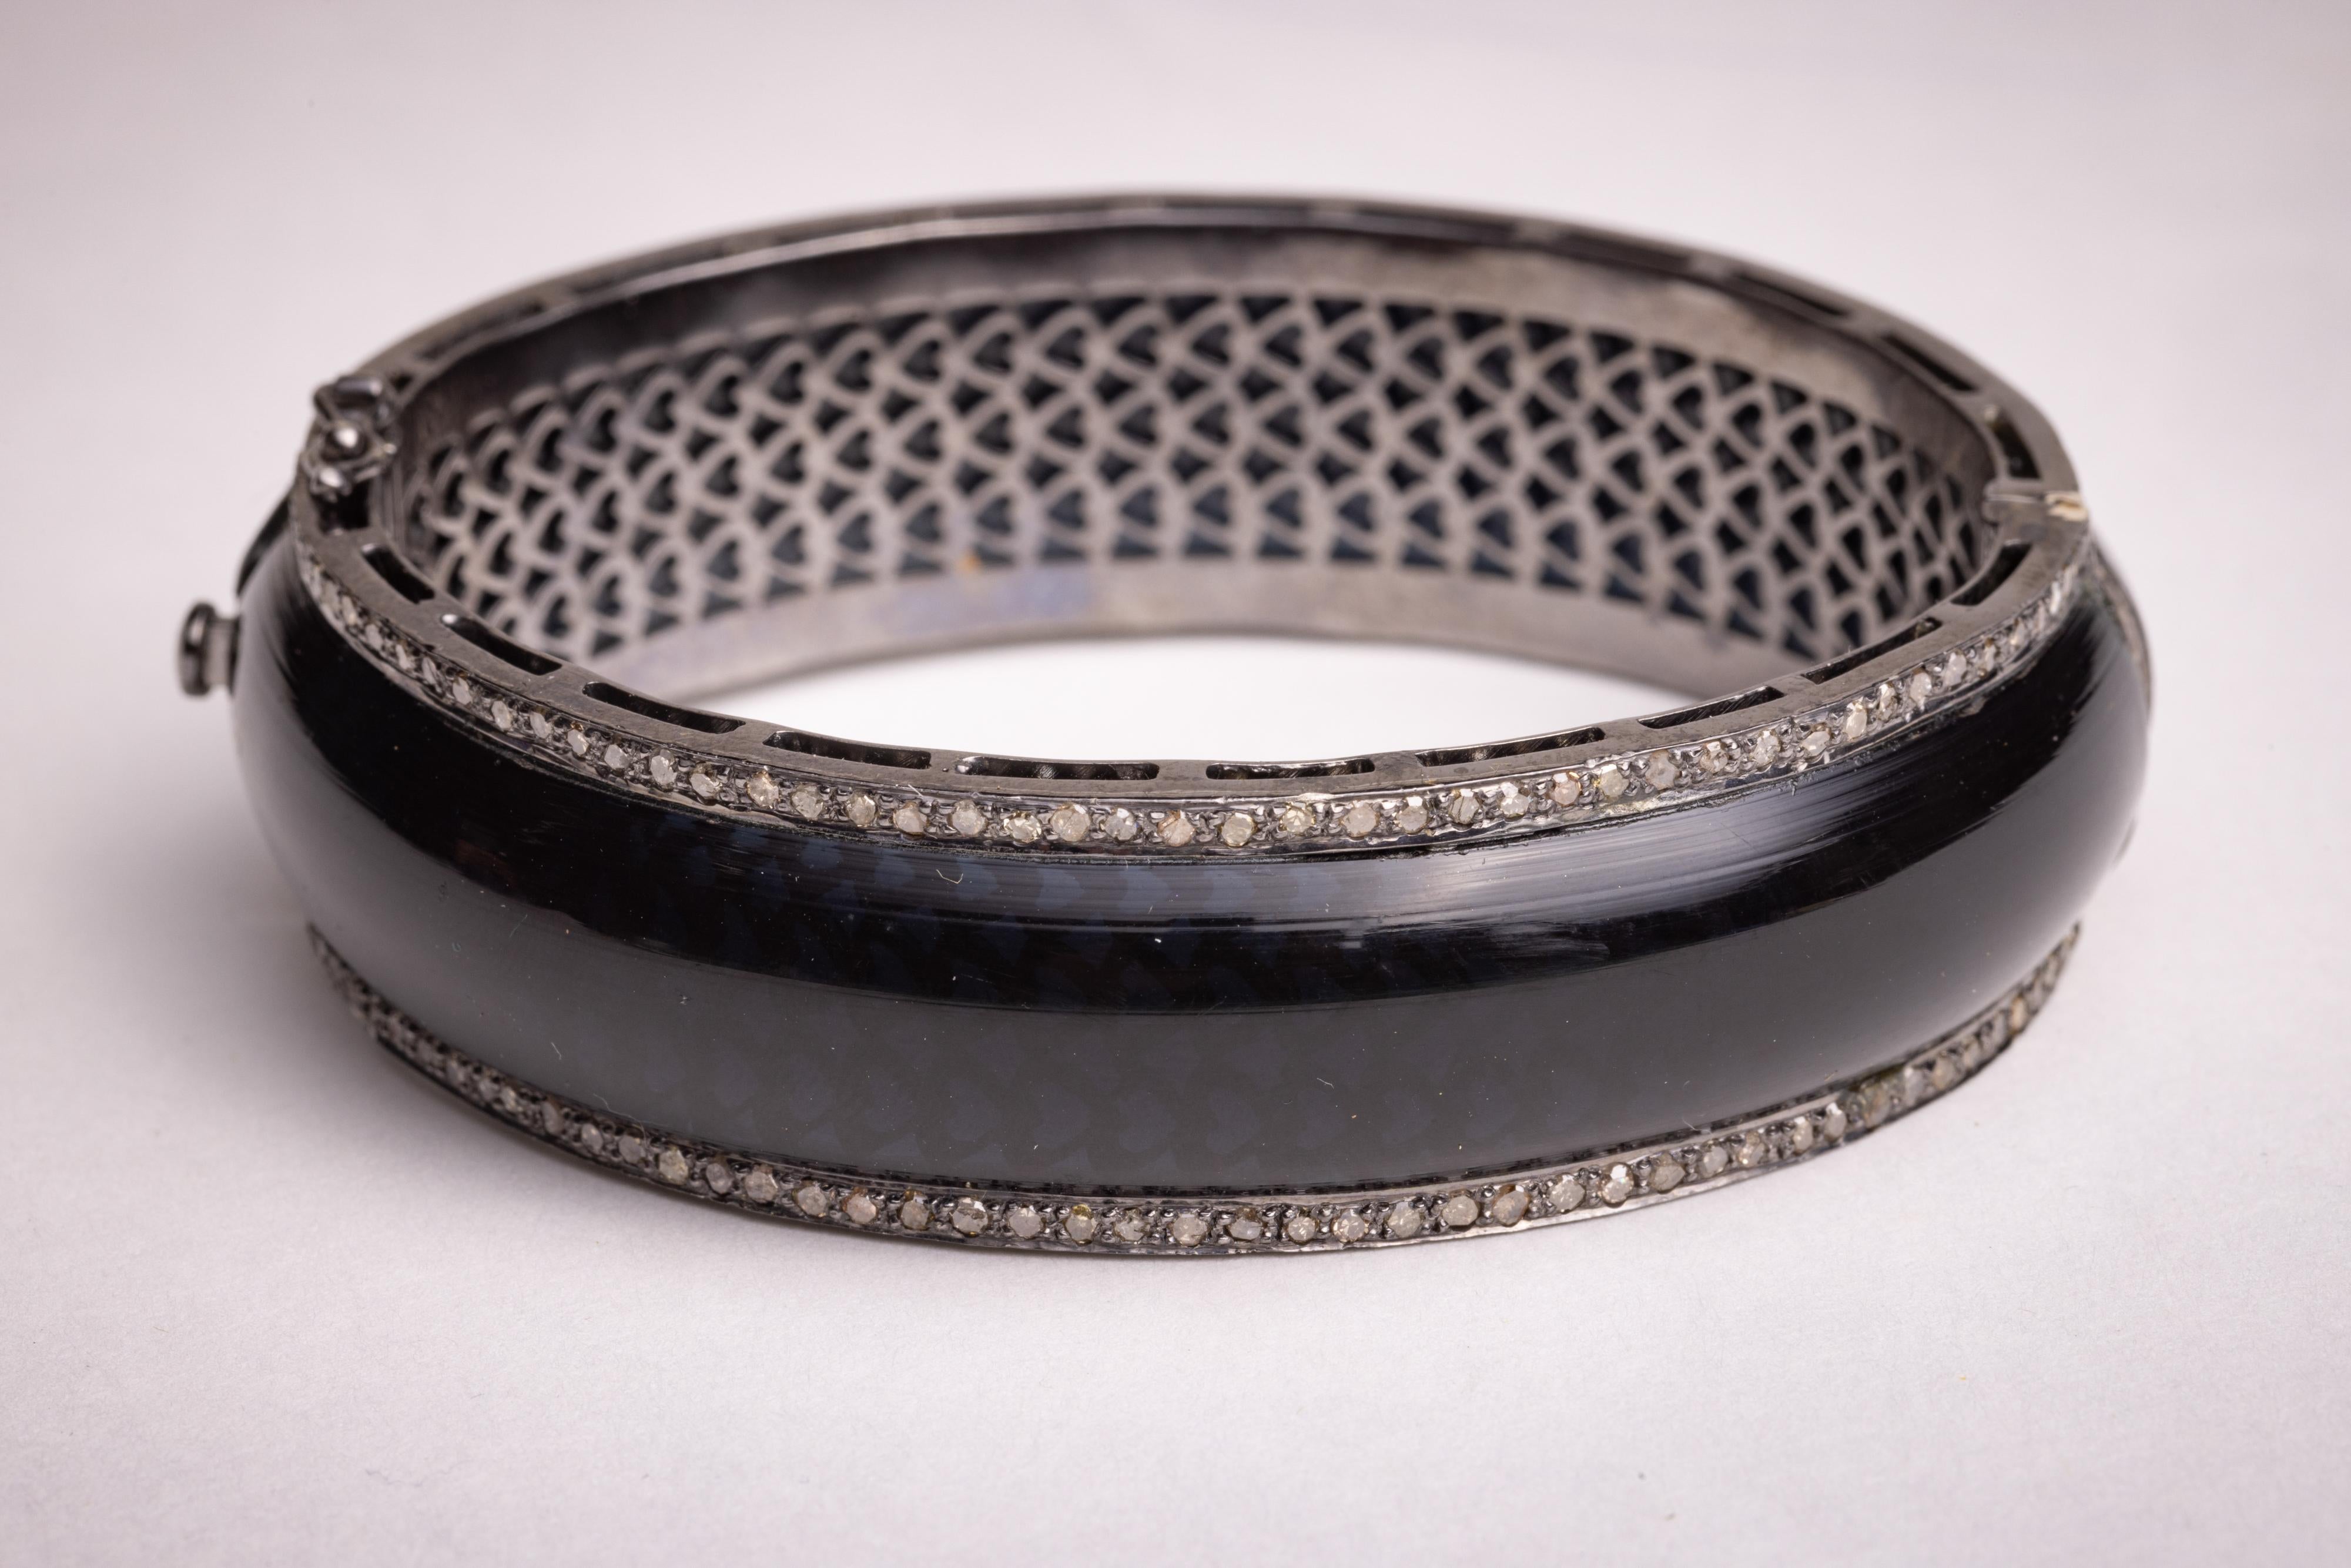 A black Bakelite bangle bracelet bordered on both sides in round, brilliant cut diamonds in a sterling silver pave` setting.  A slight oval shape keeps the bracelet closer to the wrist.  The inside circumference is 6.5